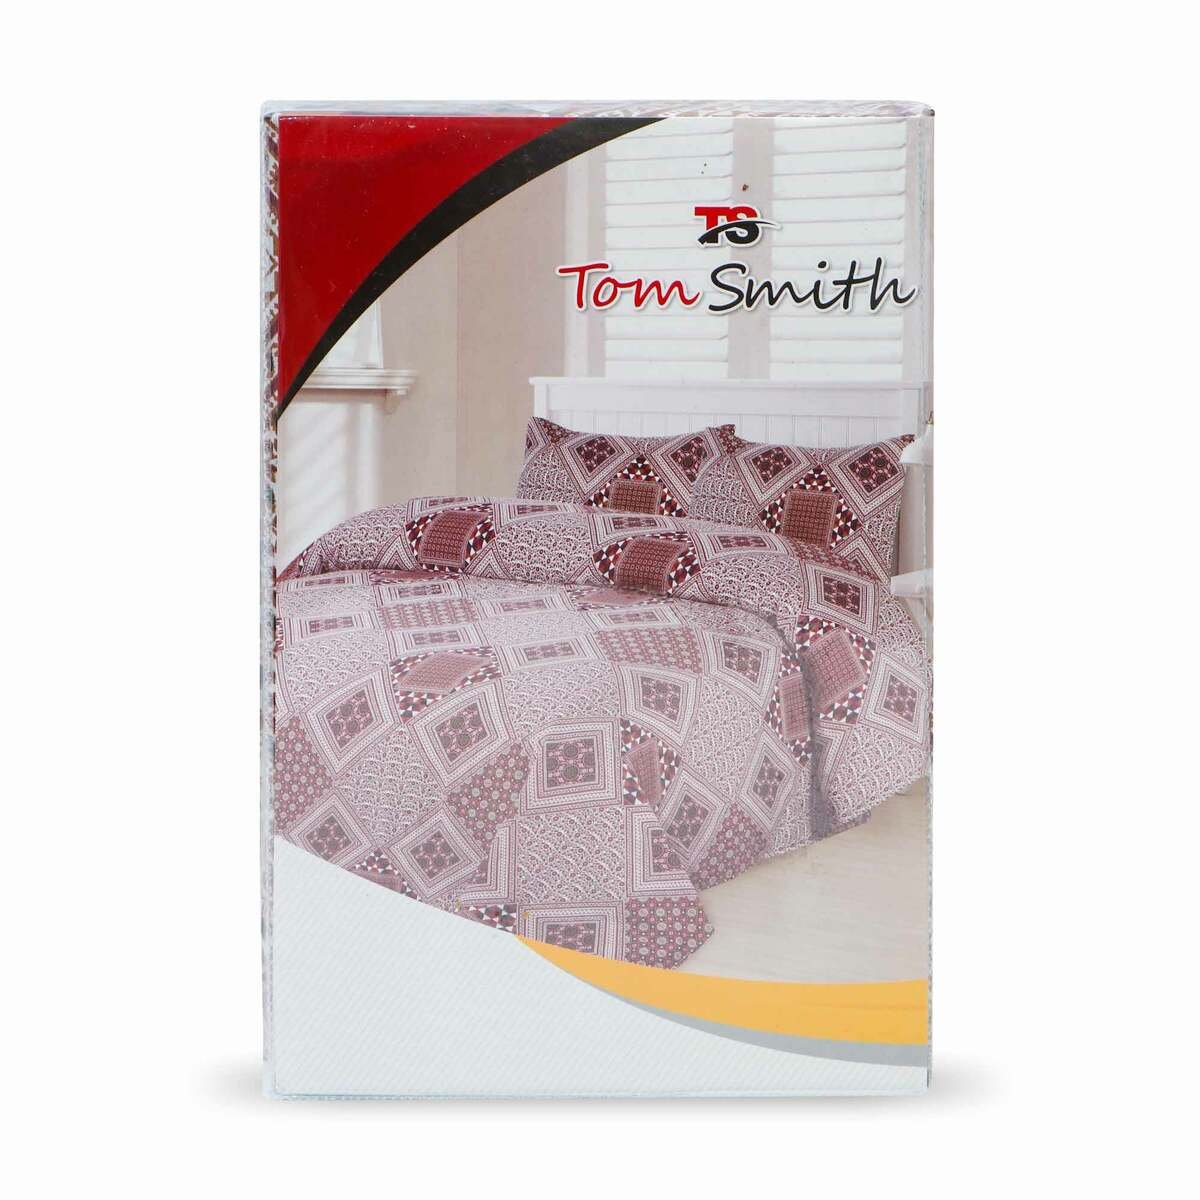 Tom Smith Bed Sheet Size: 150x240cm + Pillow Cover Brown Checks